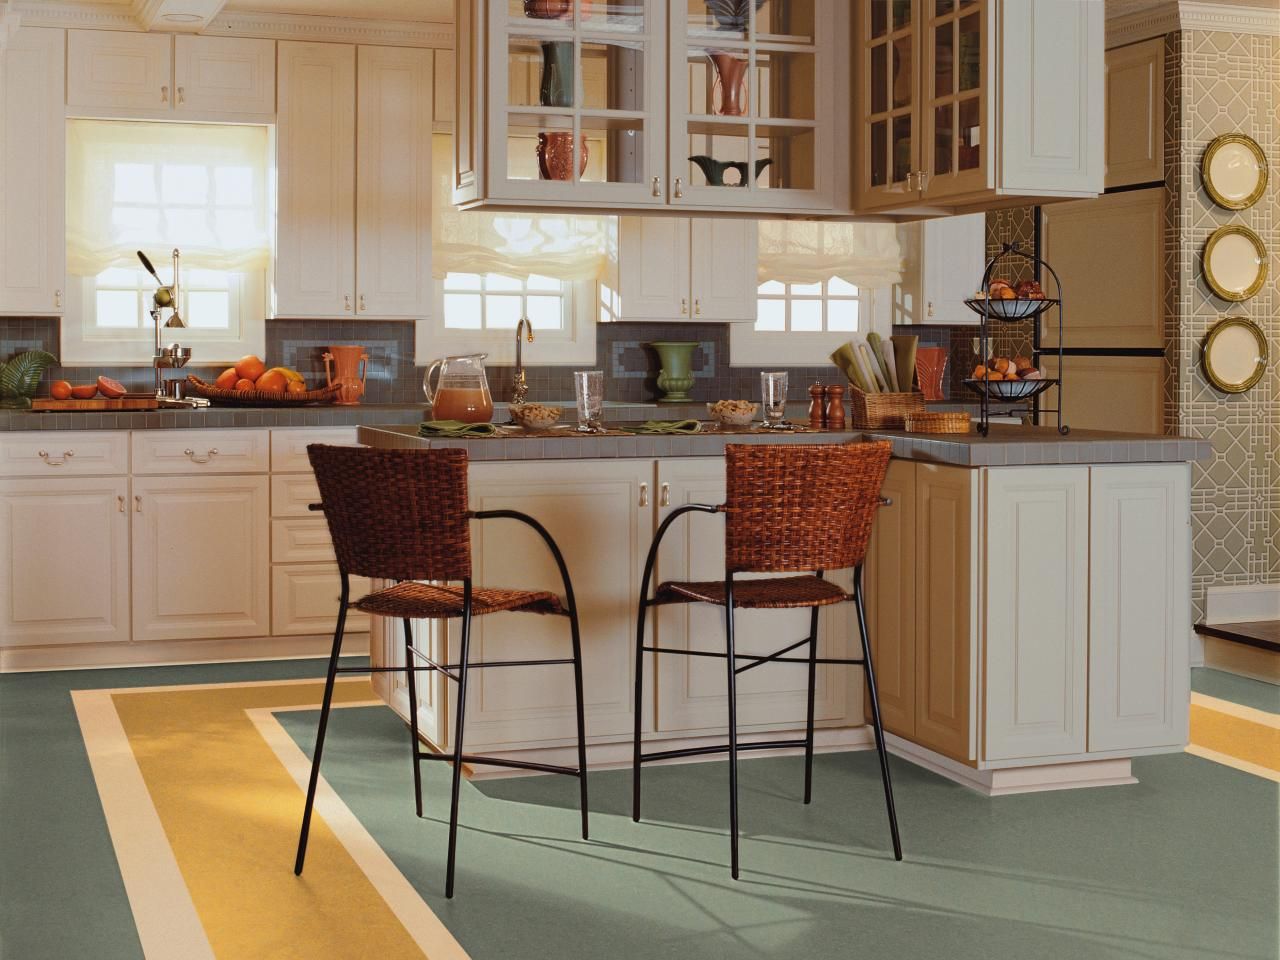 Kitchen Flooring Options: Choosing the Right Materials for Your Remodel